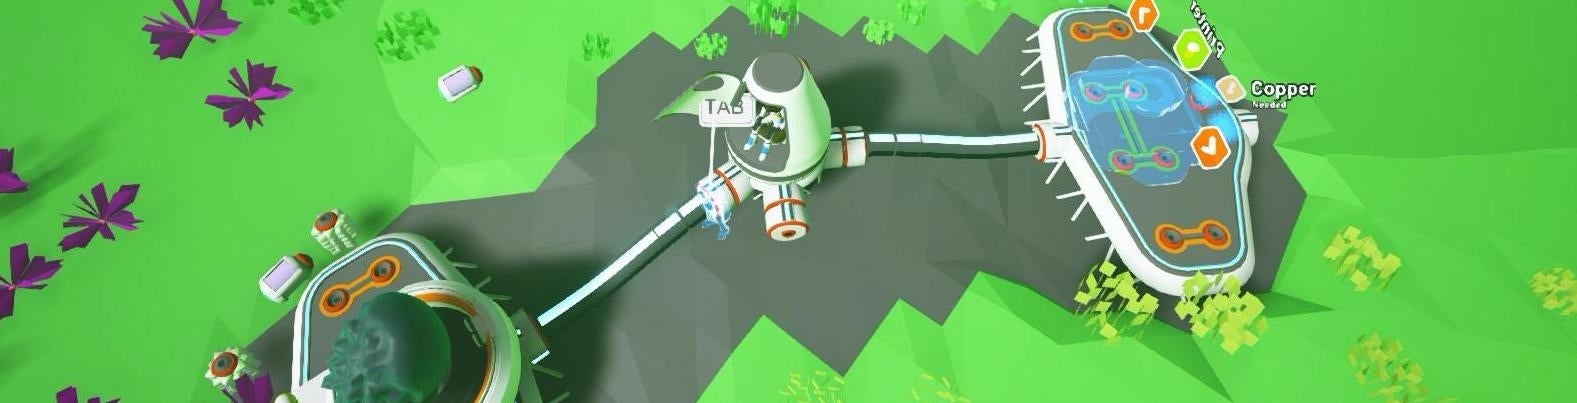 Image for At the moment, Astroneer is a fascinating inversion of typical sci-fi wonder